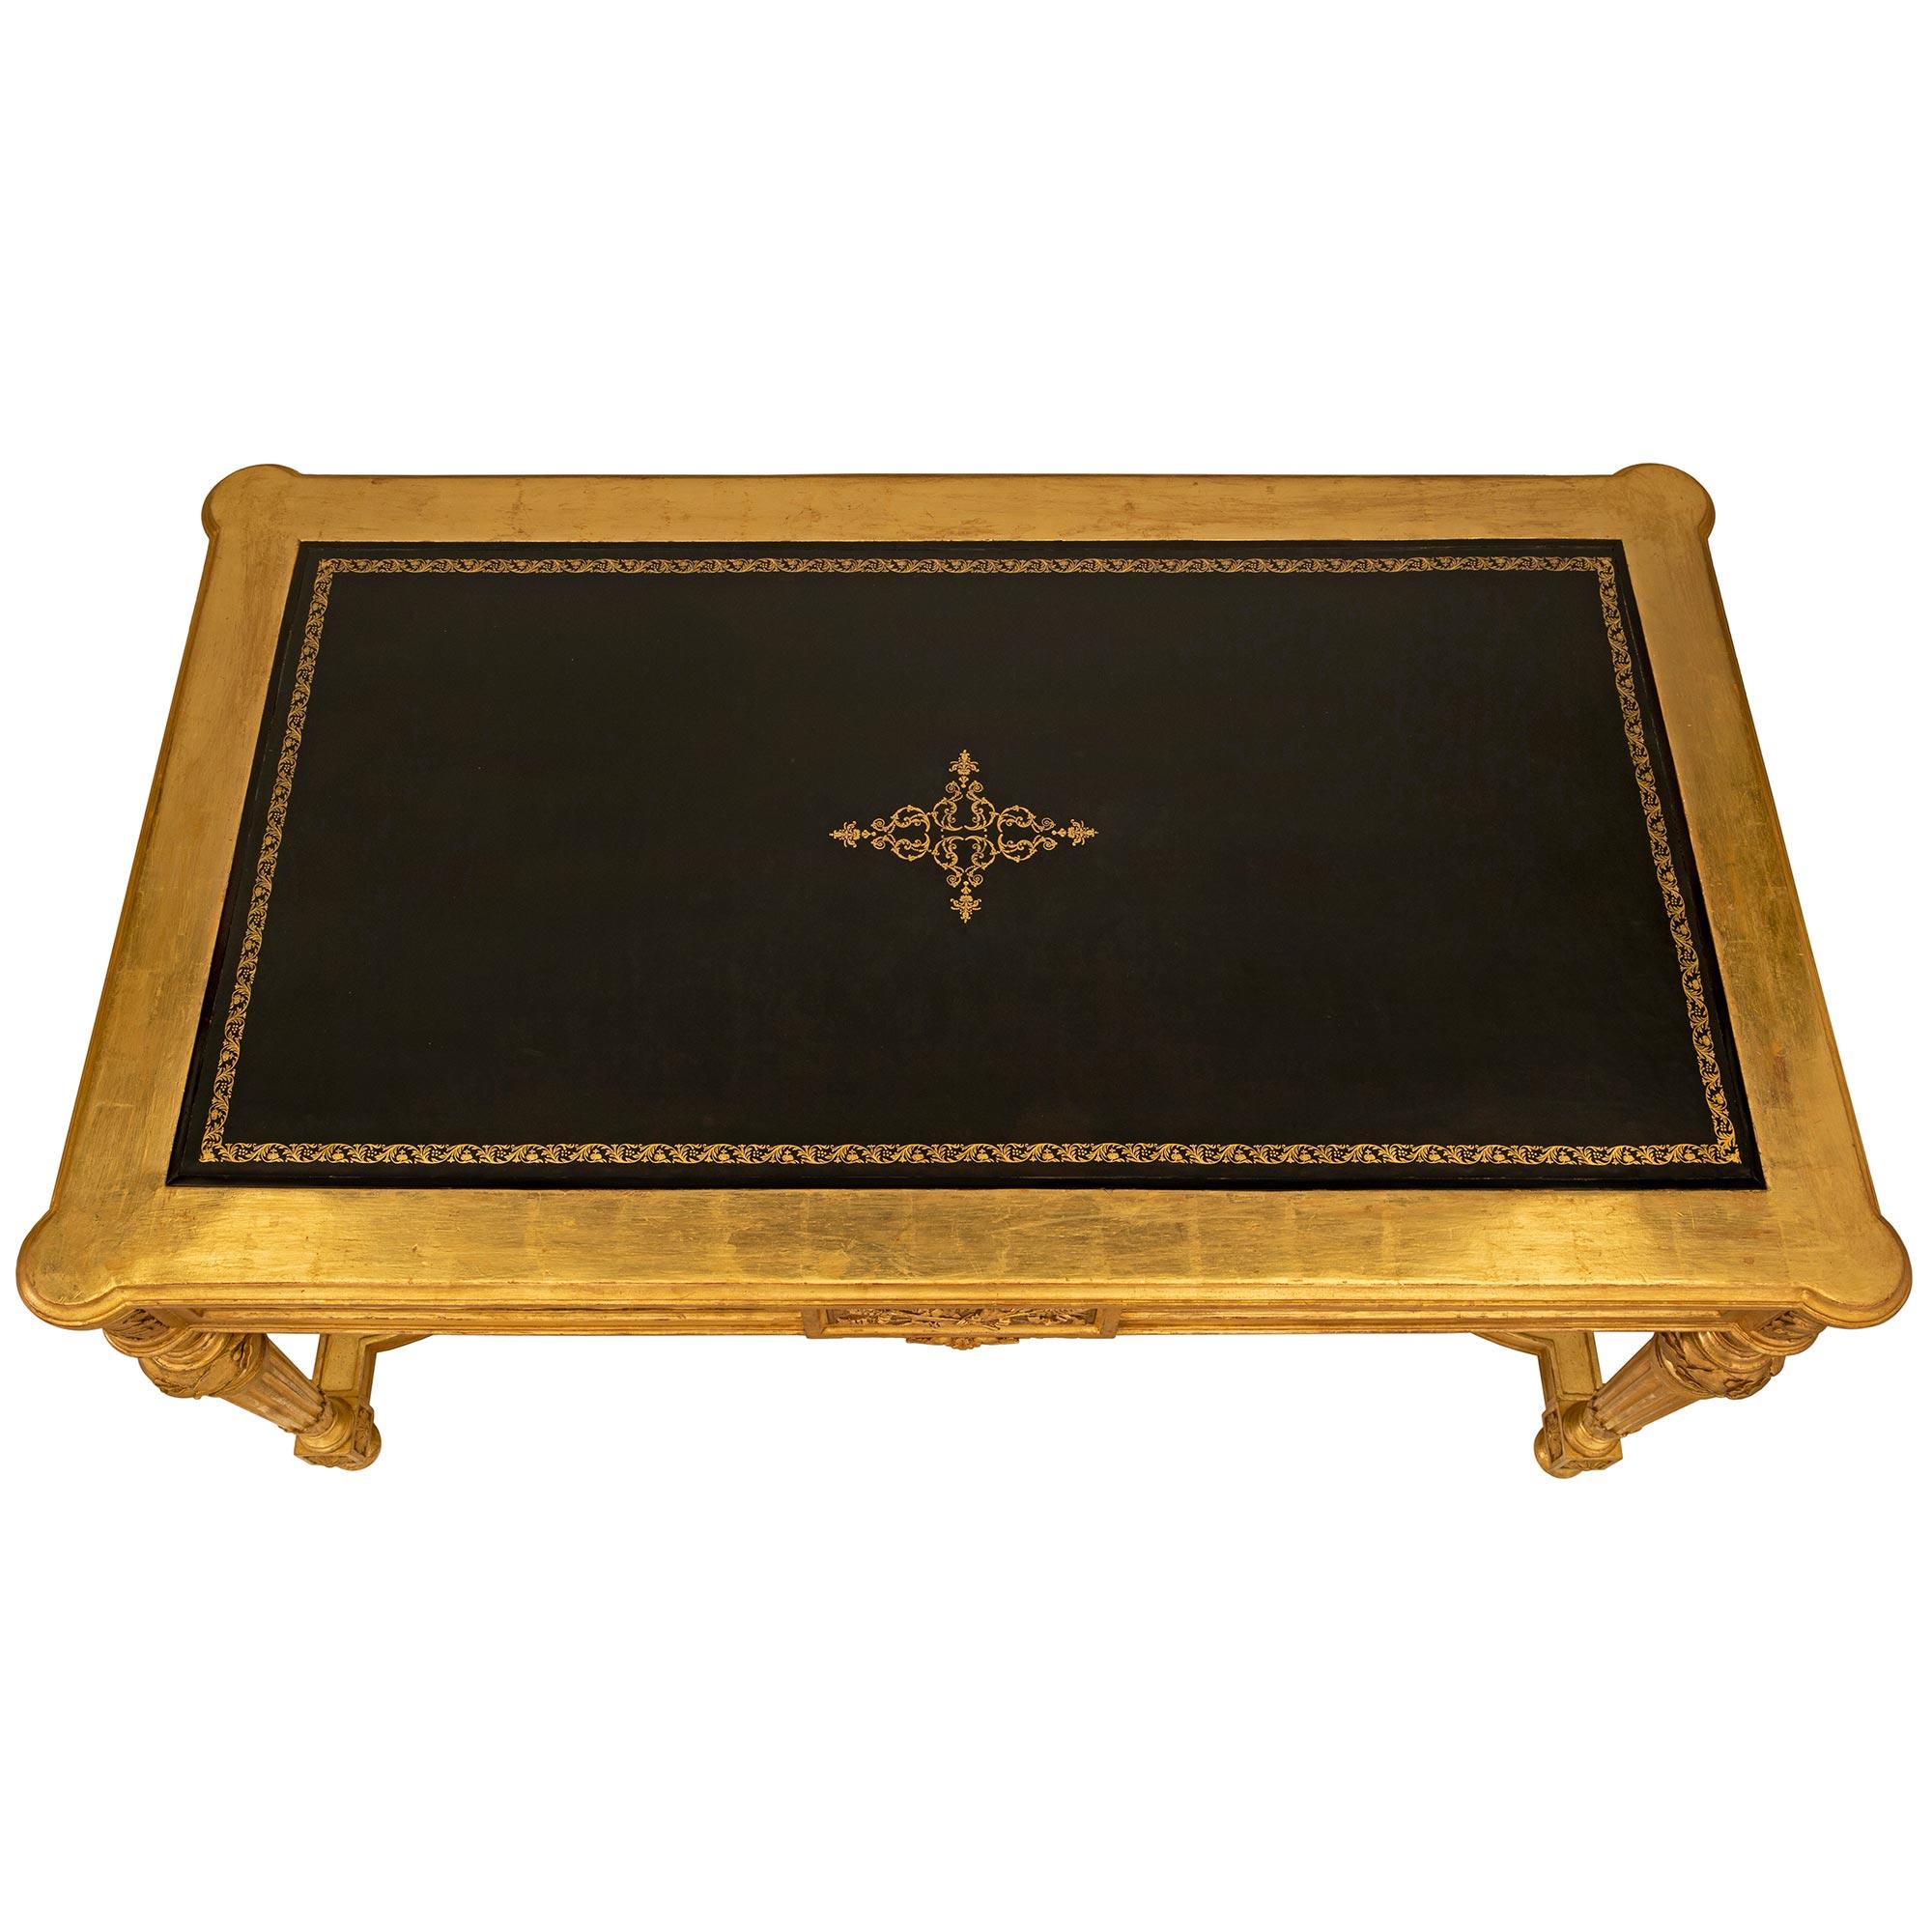 A striking and high quality French 19th century Louis XVI st. giltwood, ebonized fruitwood and leather center table. The rectangular table is raised by elegant circular fluted tapered legs with fine topie shaped feet and beautiful finely carved